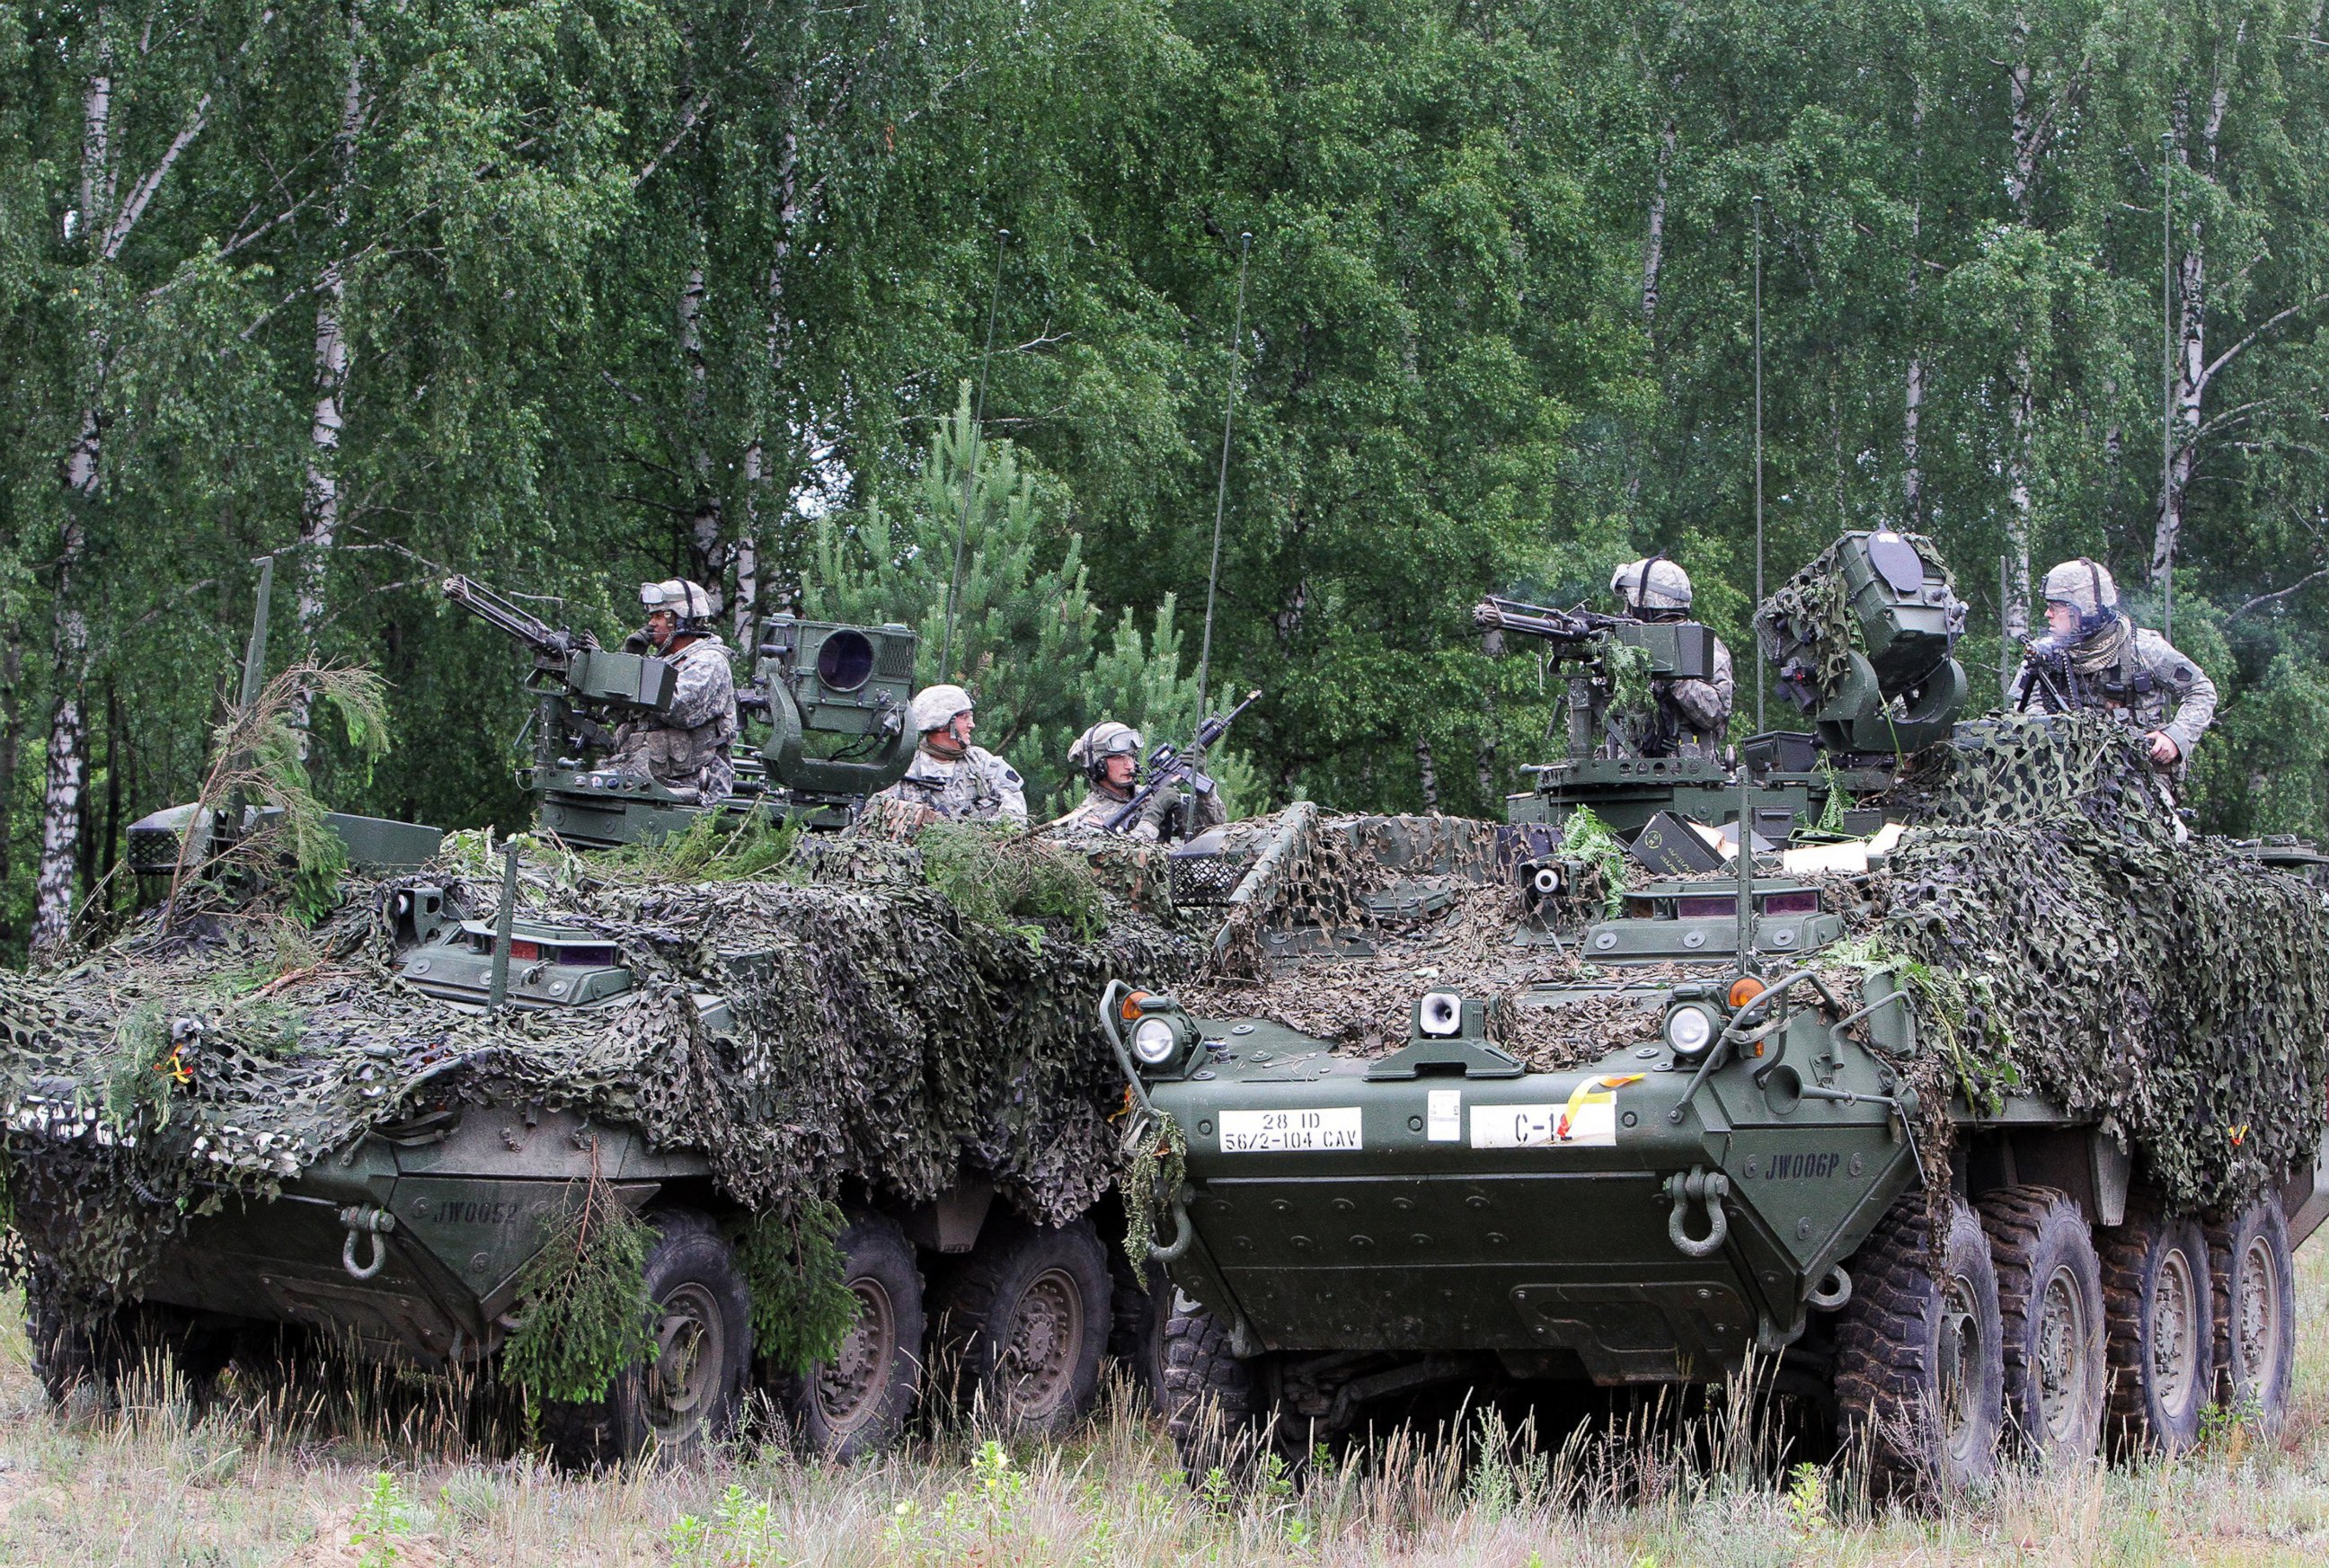 PHOTO: Soldiers from the U.S. Pennsylvania National Guard take part in a field training exercise during the first phase Saber Strike 2014, at the Rukla military base, Lithuania, on June 14, 2014.